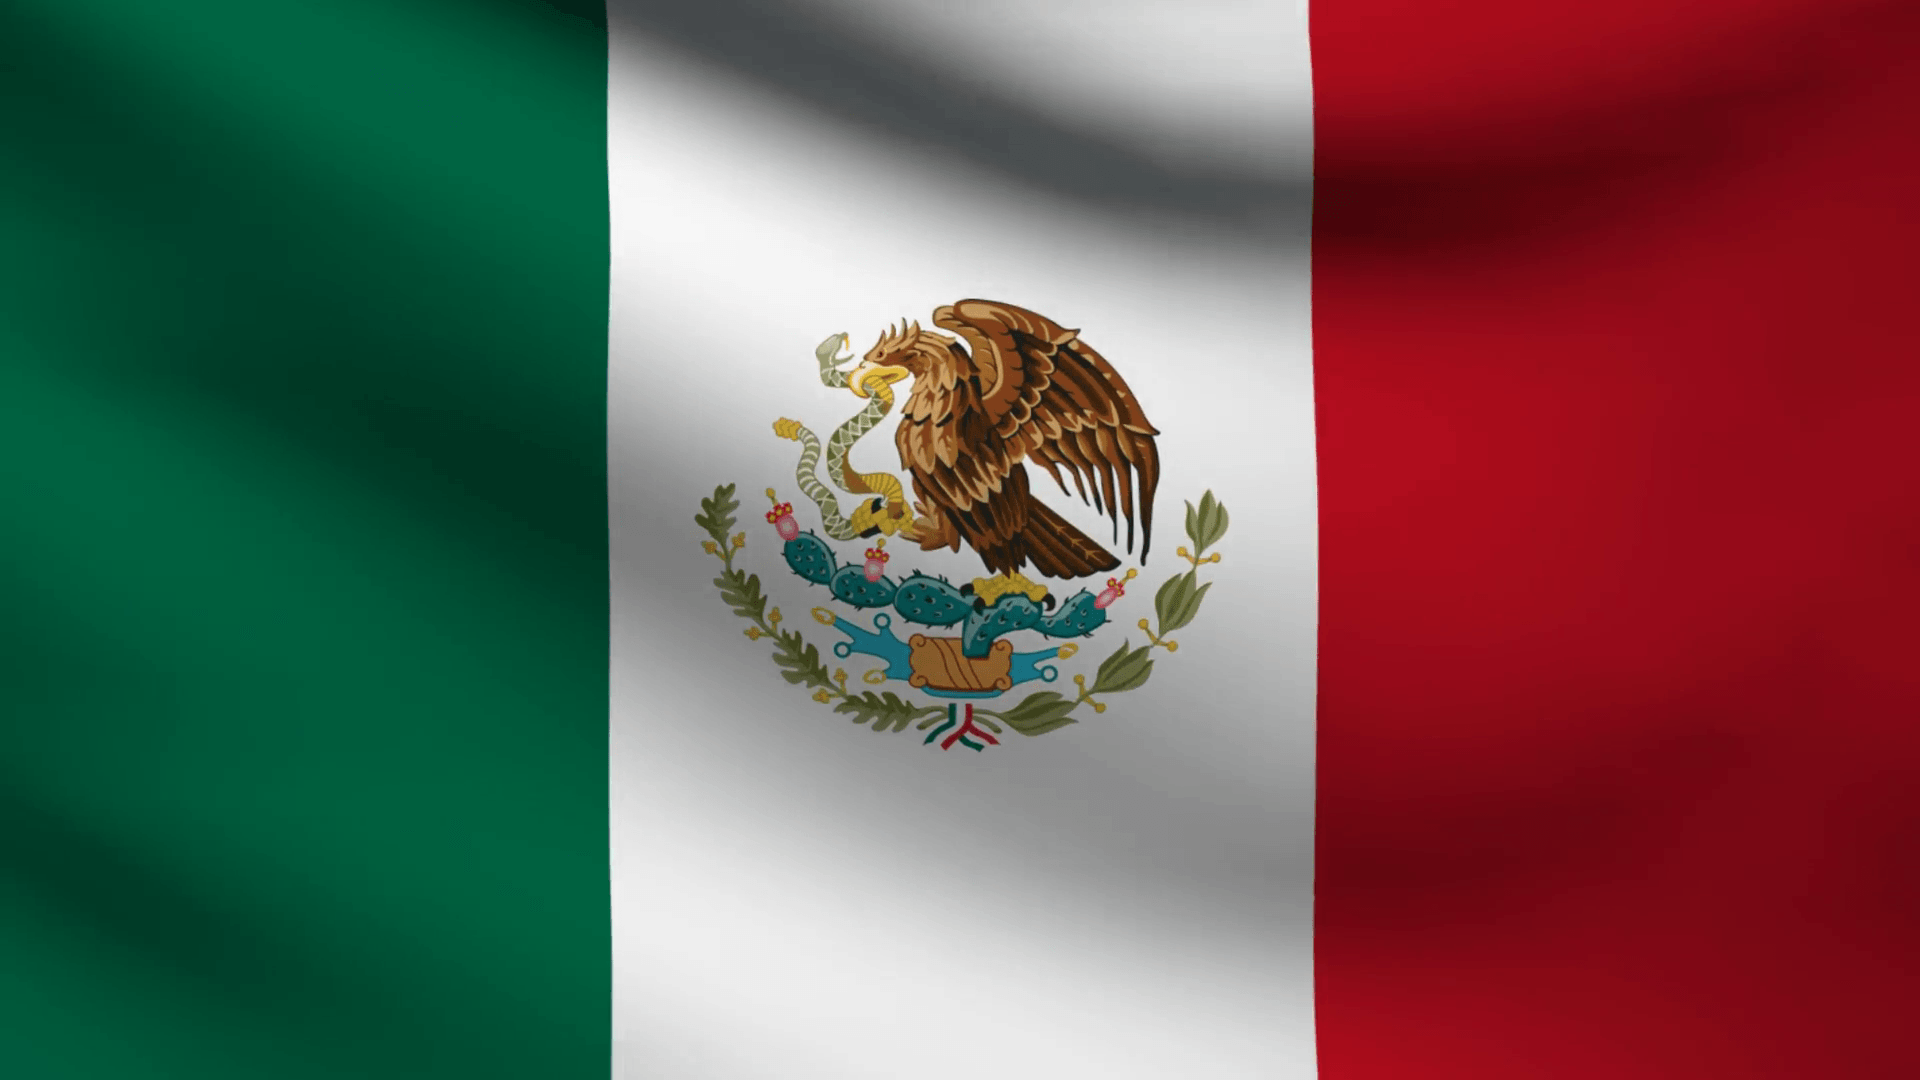 New Pic Of Mexico Flag Image YouTube